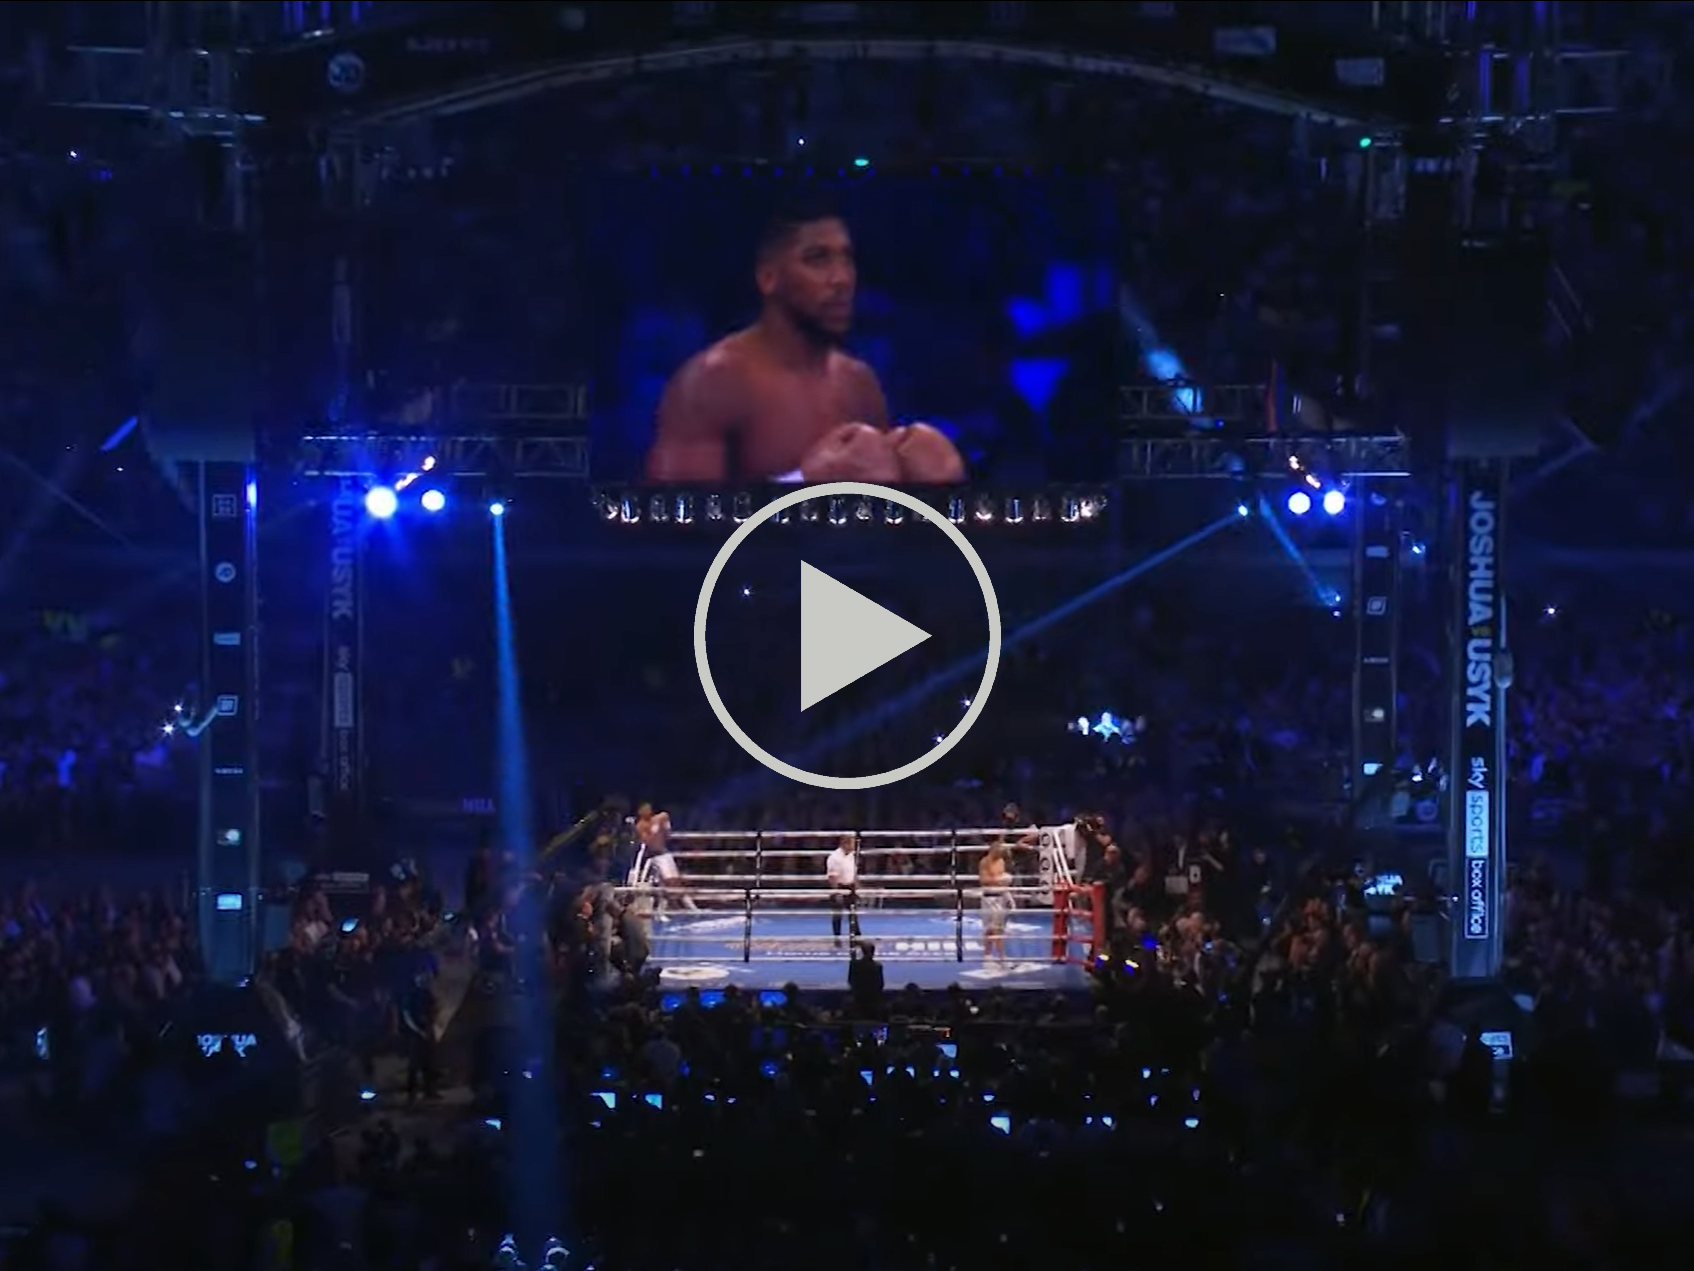 Anthony Joshua vs Oleksandr Usyk Free live streams to watch fight spread online amid piracy warnings The Independent